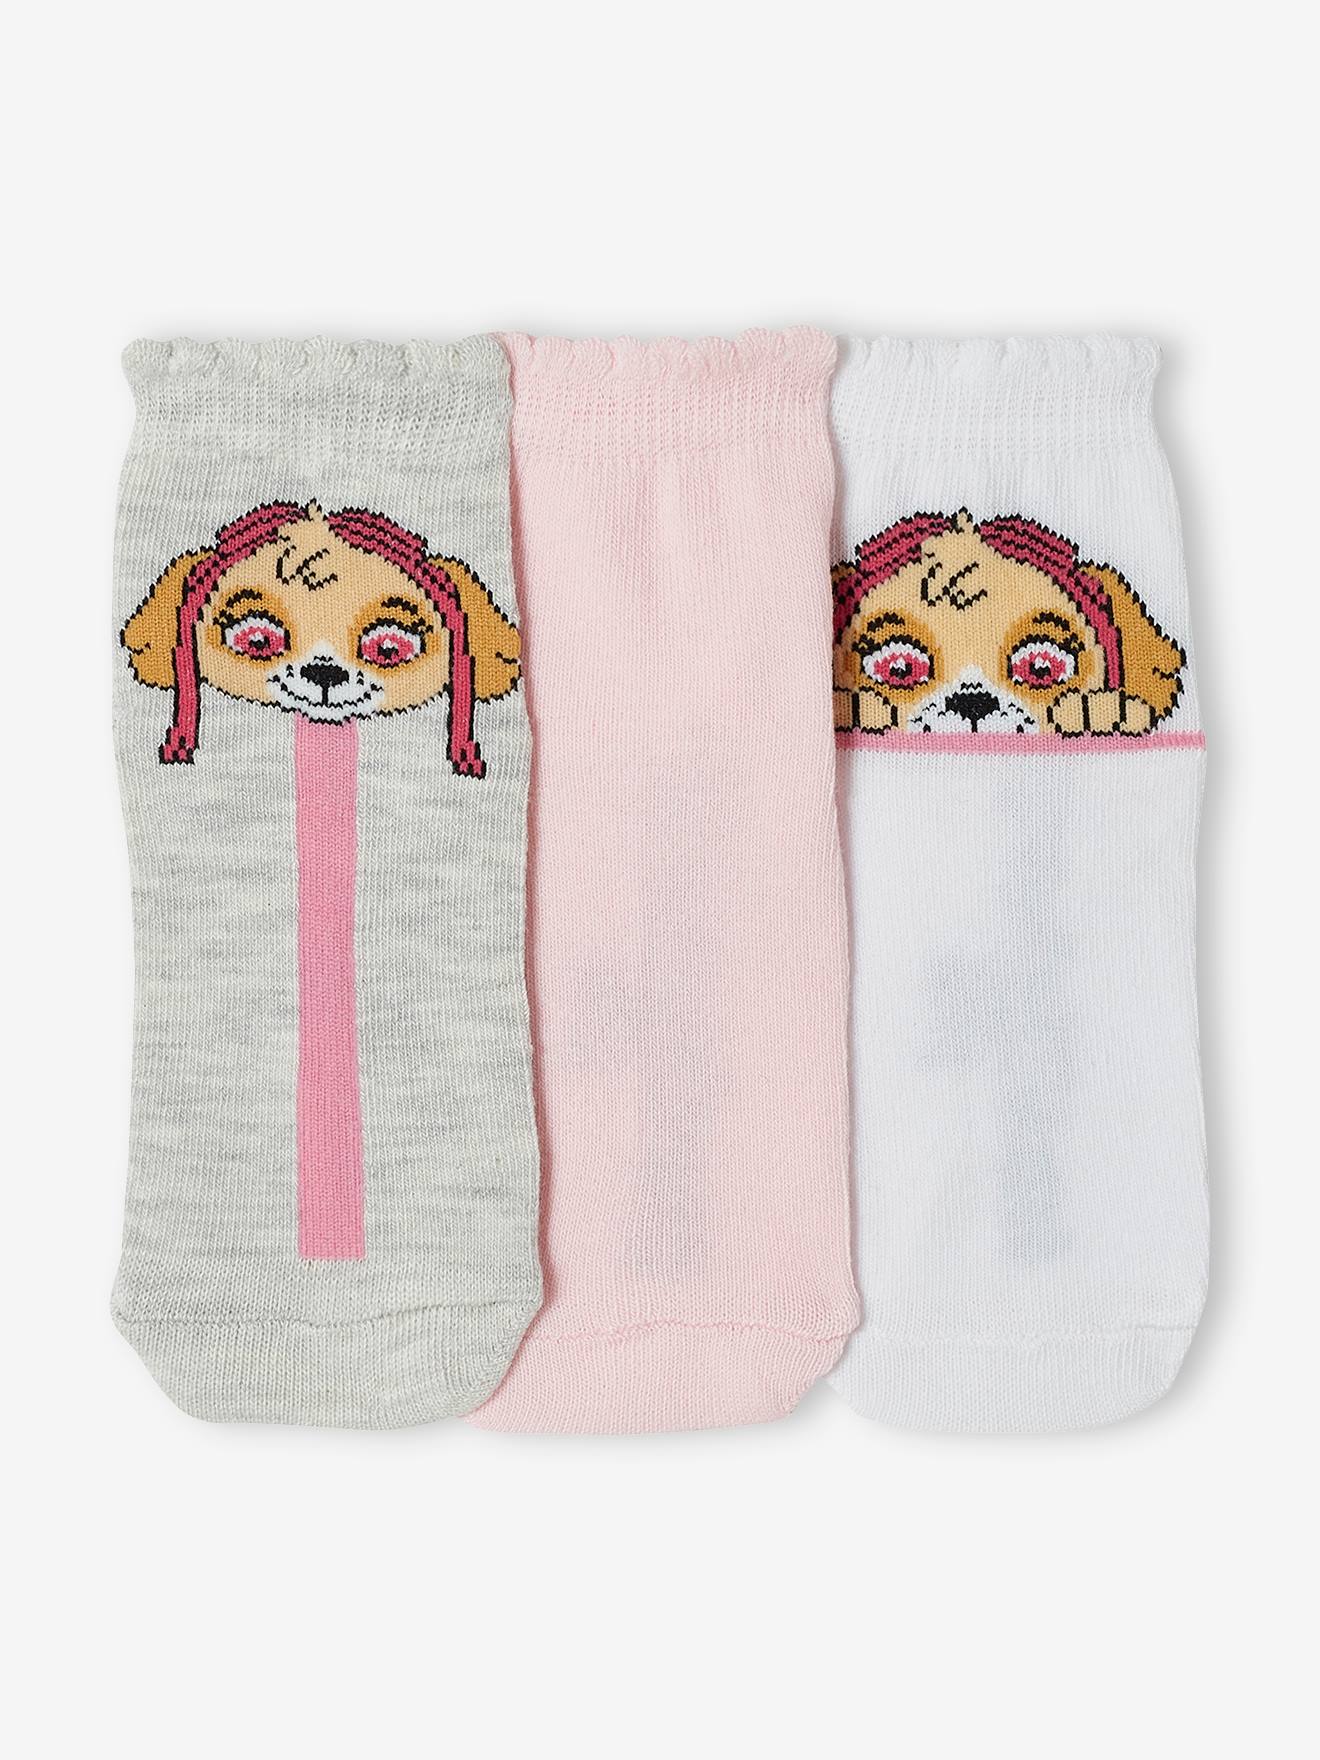 Pack of 3 Pairs of Paw Patrol(r) Socks for Girls set pink